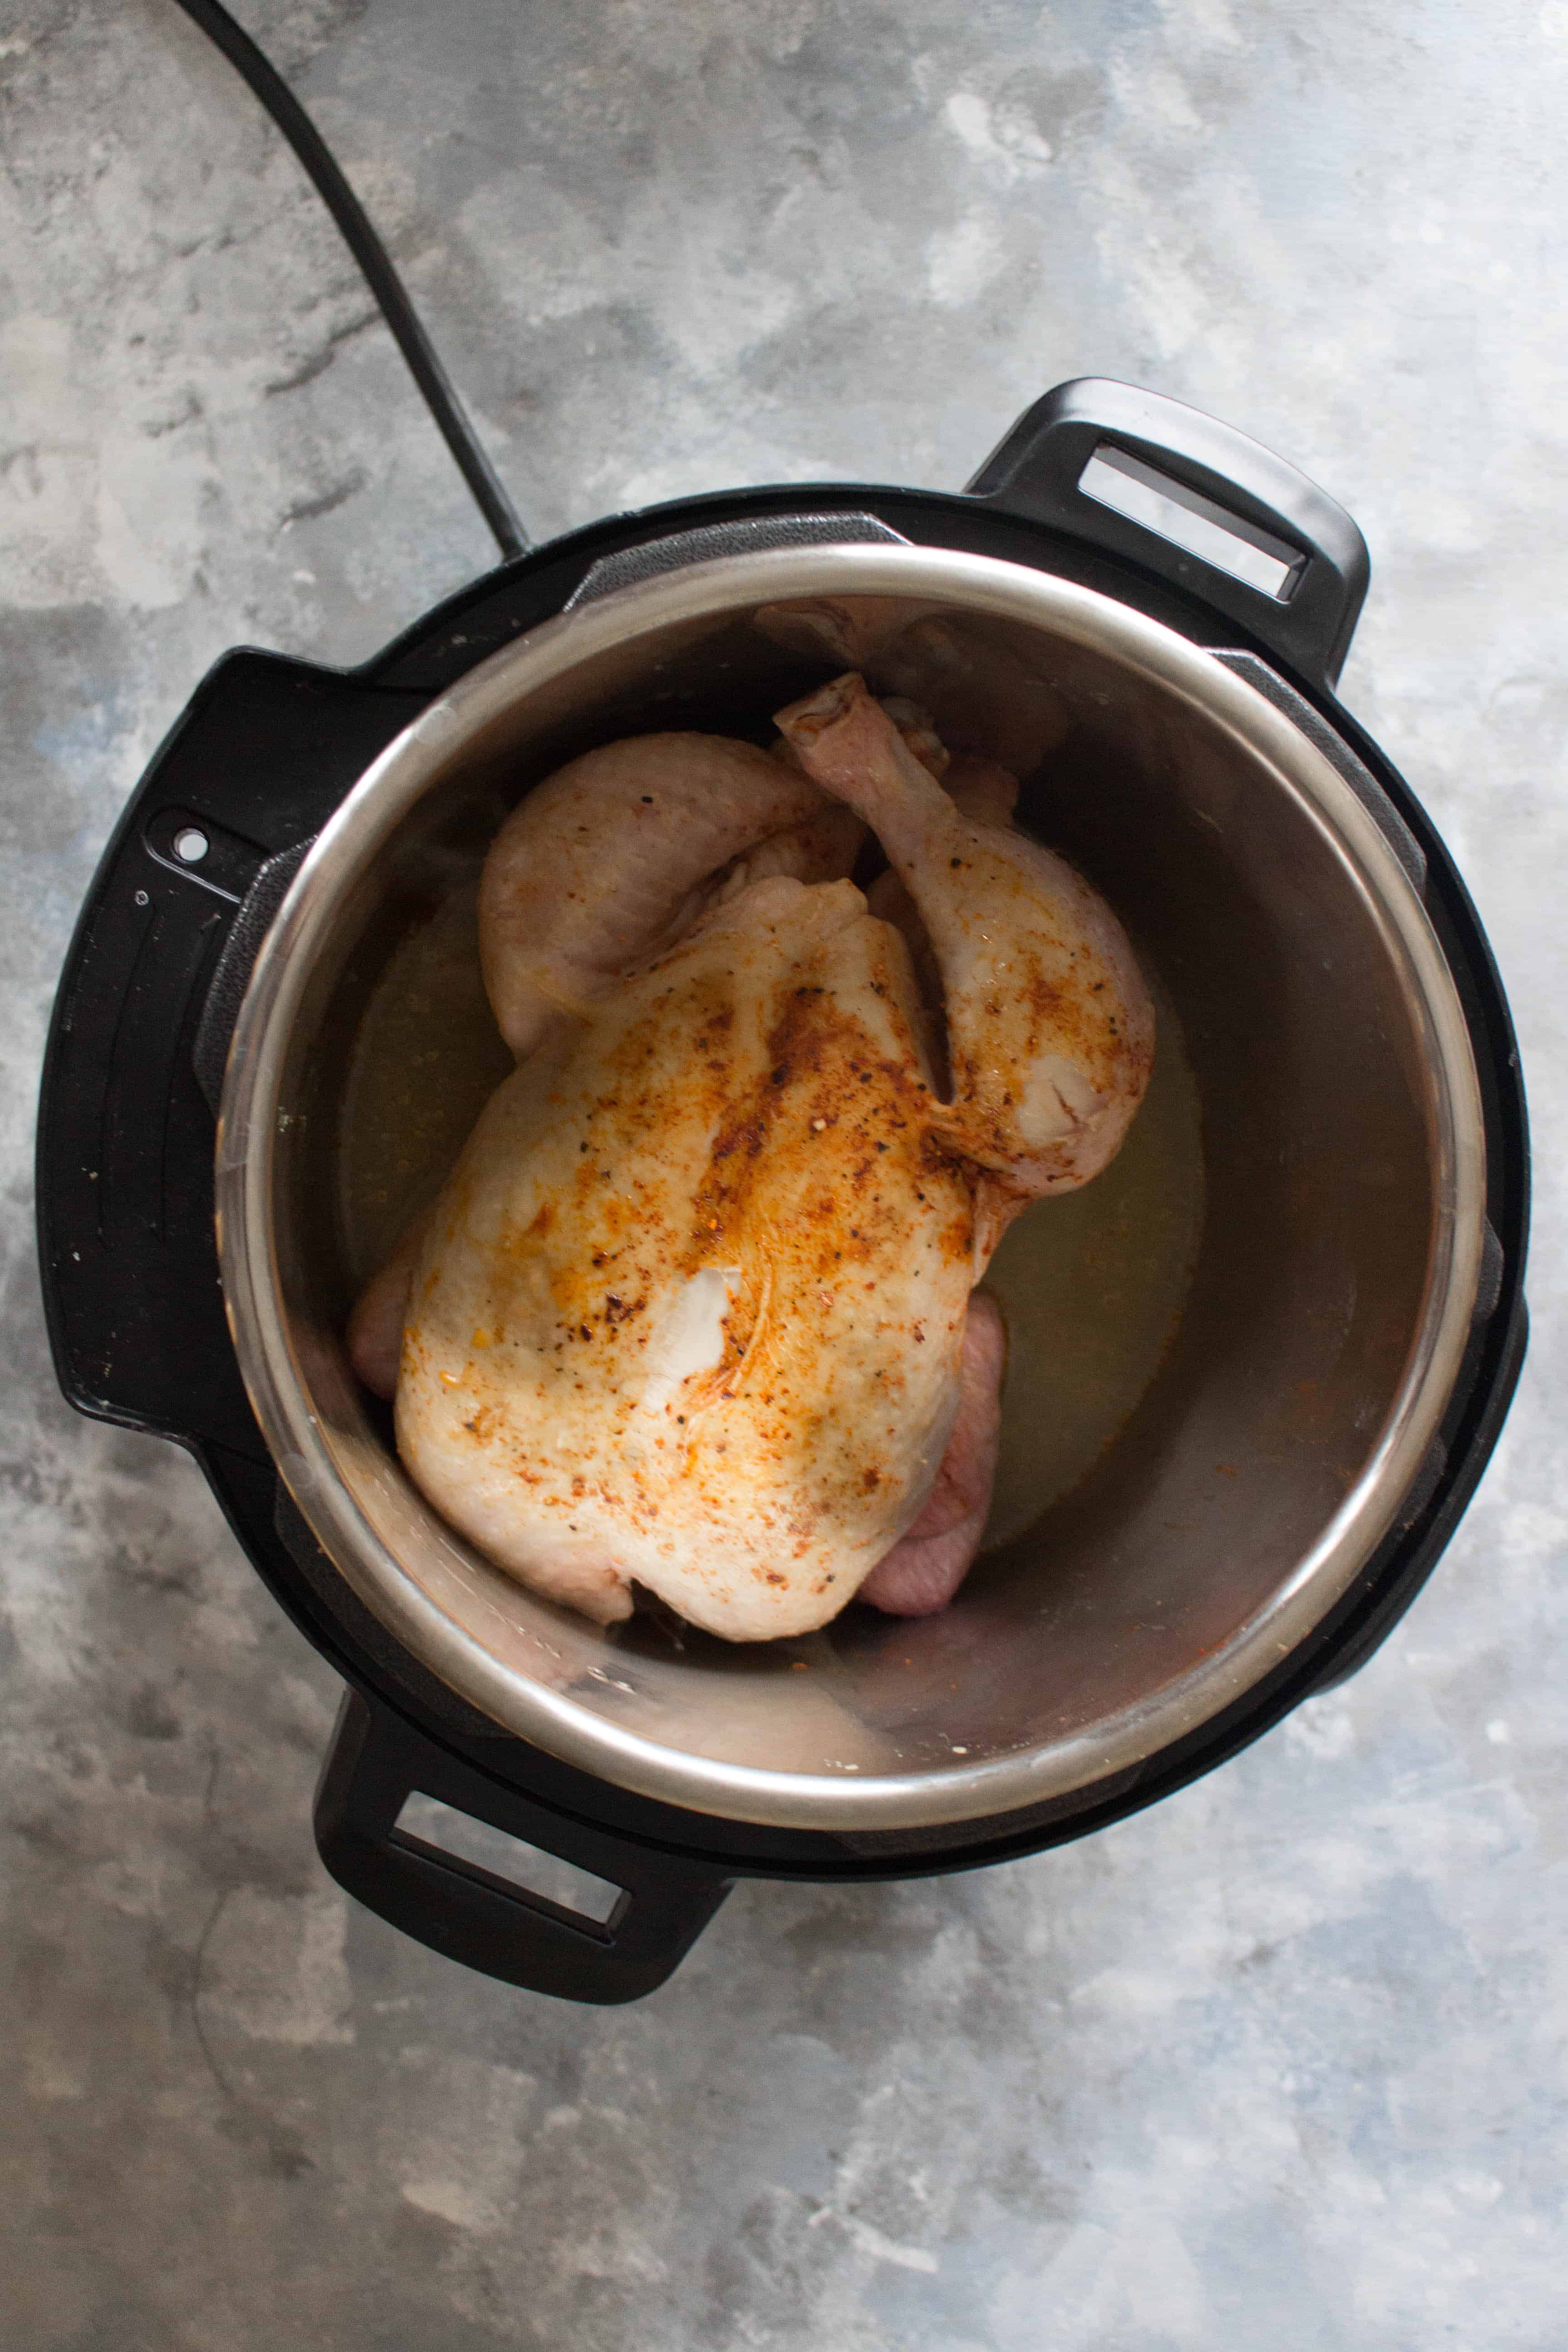 Flipped whole chicken in Instant Pot | Curious as to how to cook a whole chicken in an Instant Pot? Keep reading to see how you can make a delicious, fall off the bone, and the juiciest whole chicken in an Instant Pot!